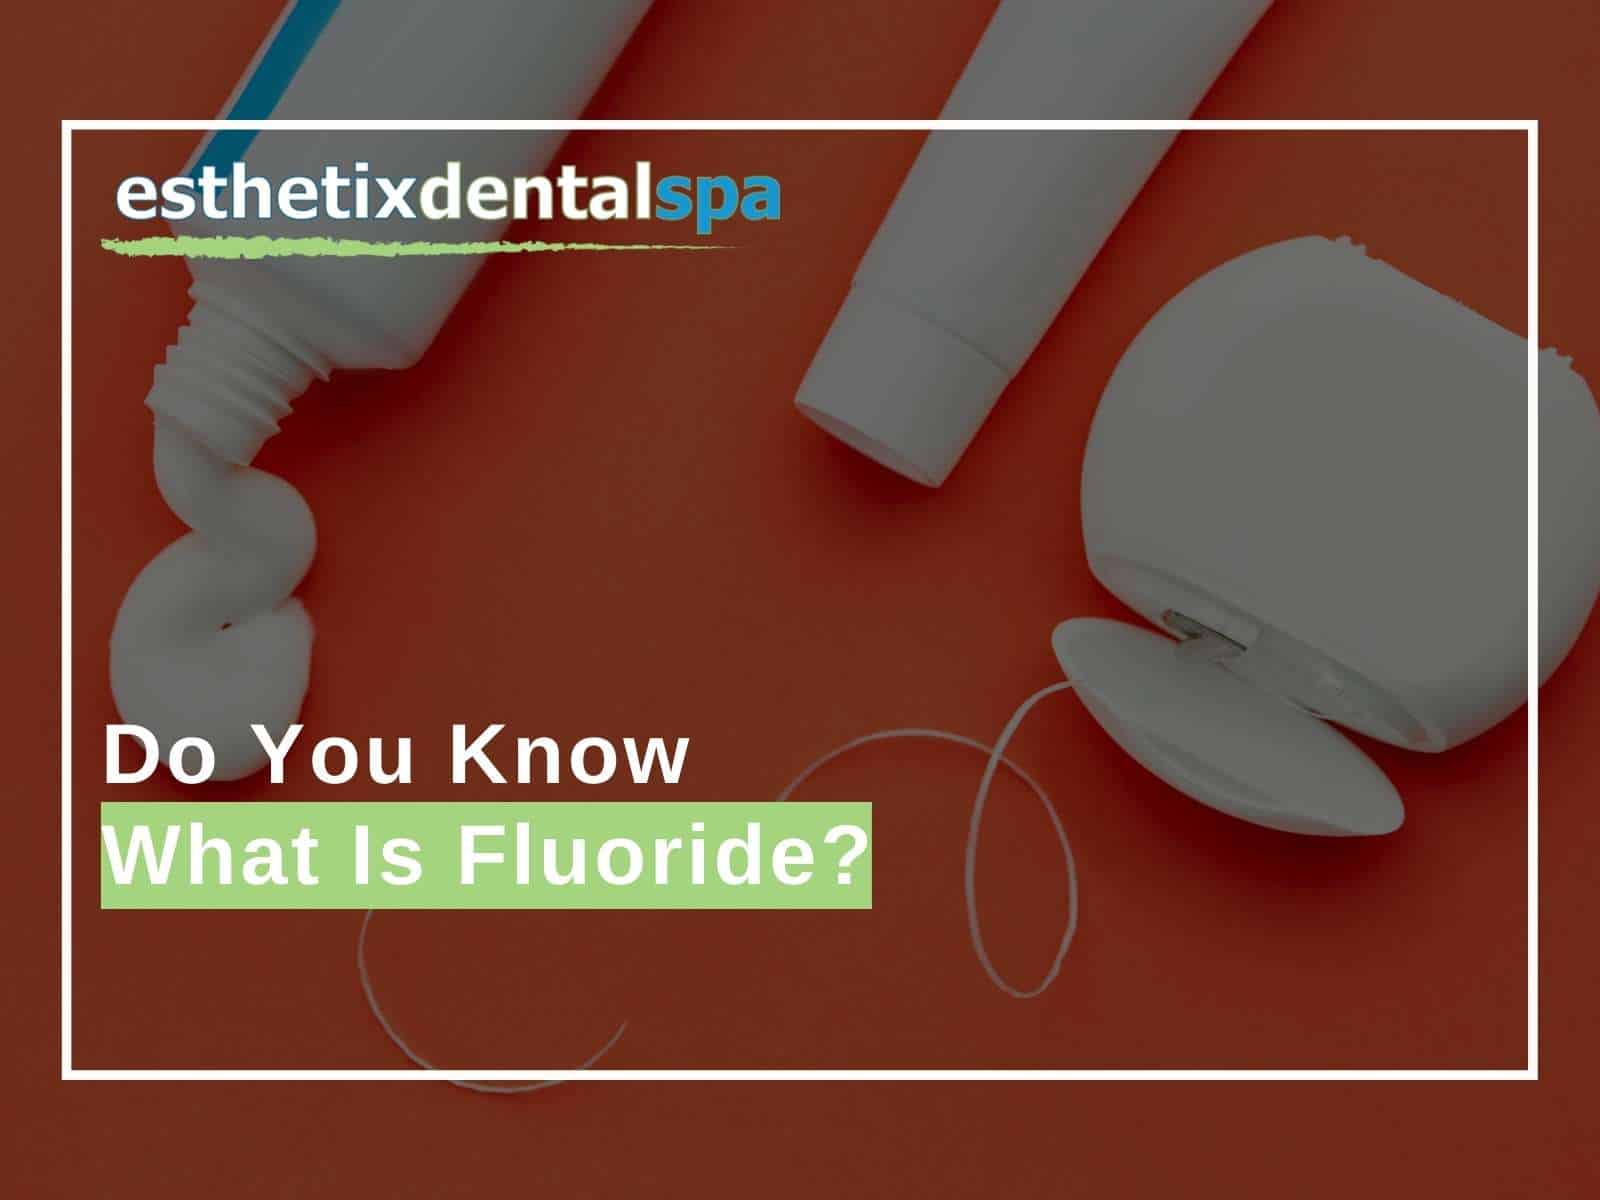 Do You Know What Is Fluoride?